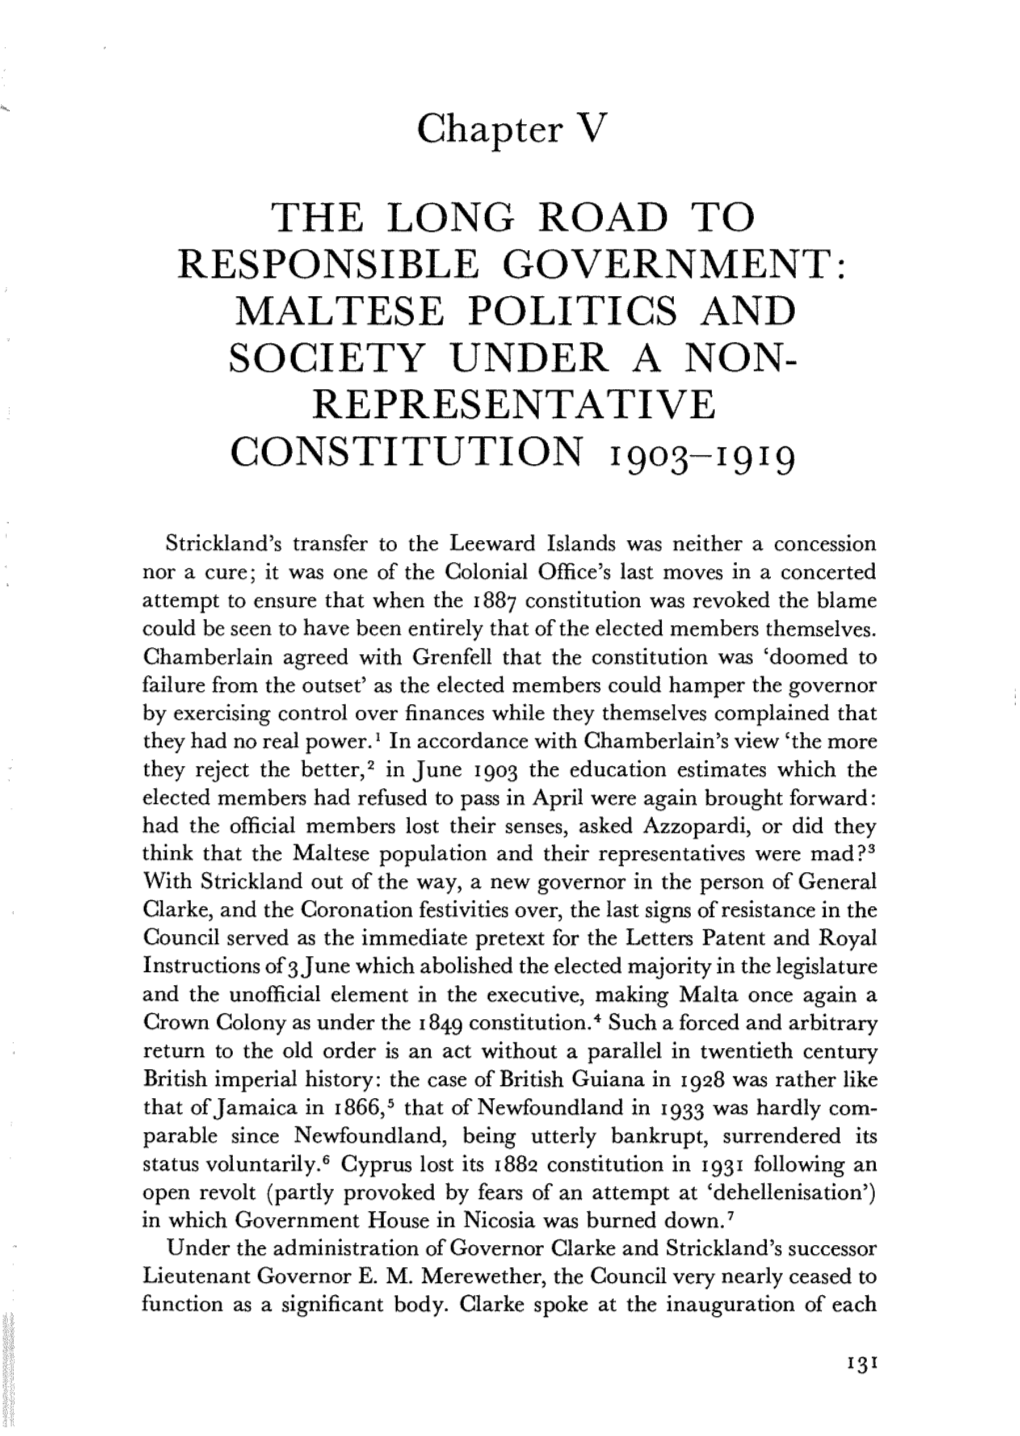 The Long Road to Responsible Government : Maltese Politics and Society Under a Non-Representative Constitution 1903-1919